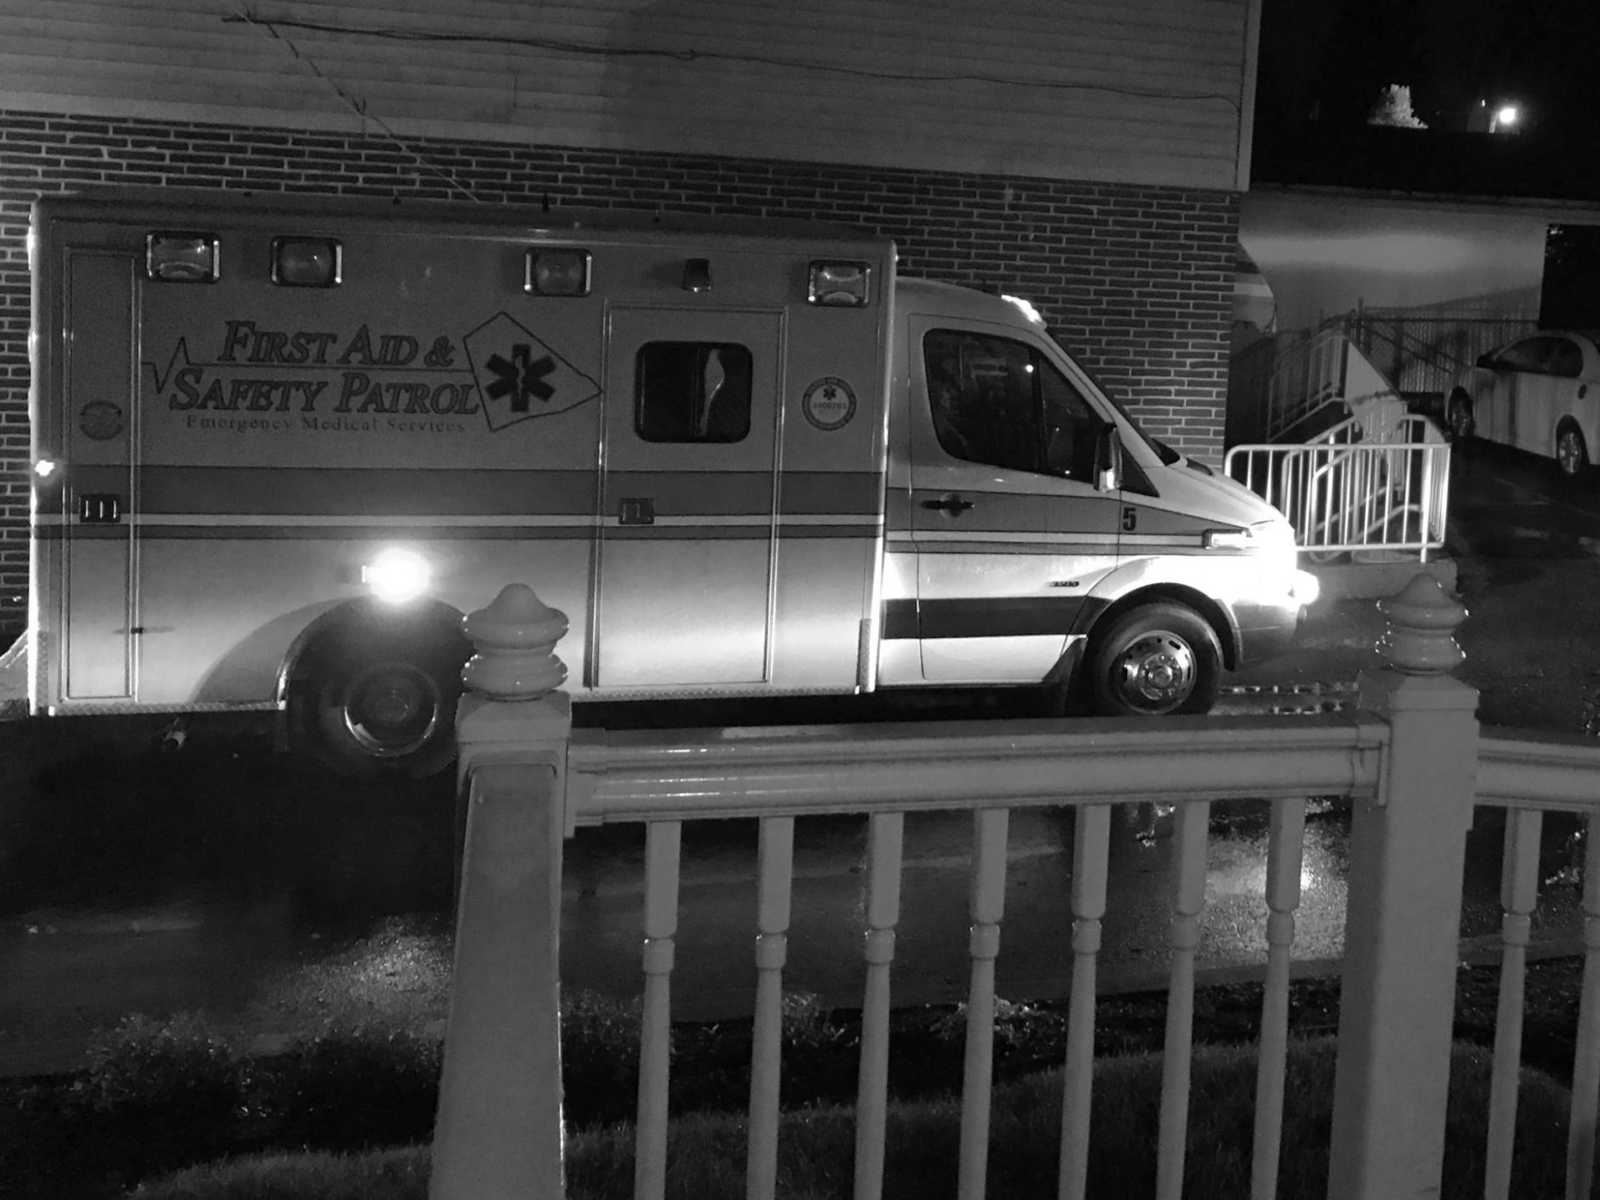 White banister in forefront and ambulance in the background in road